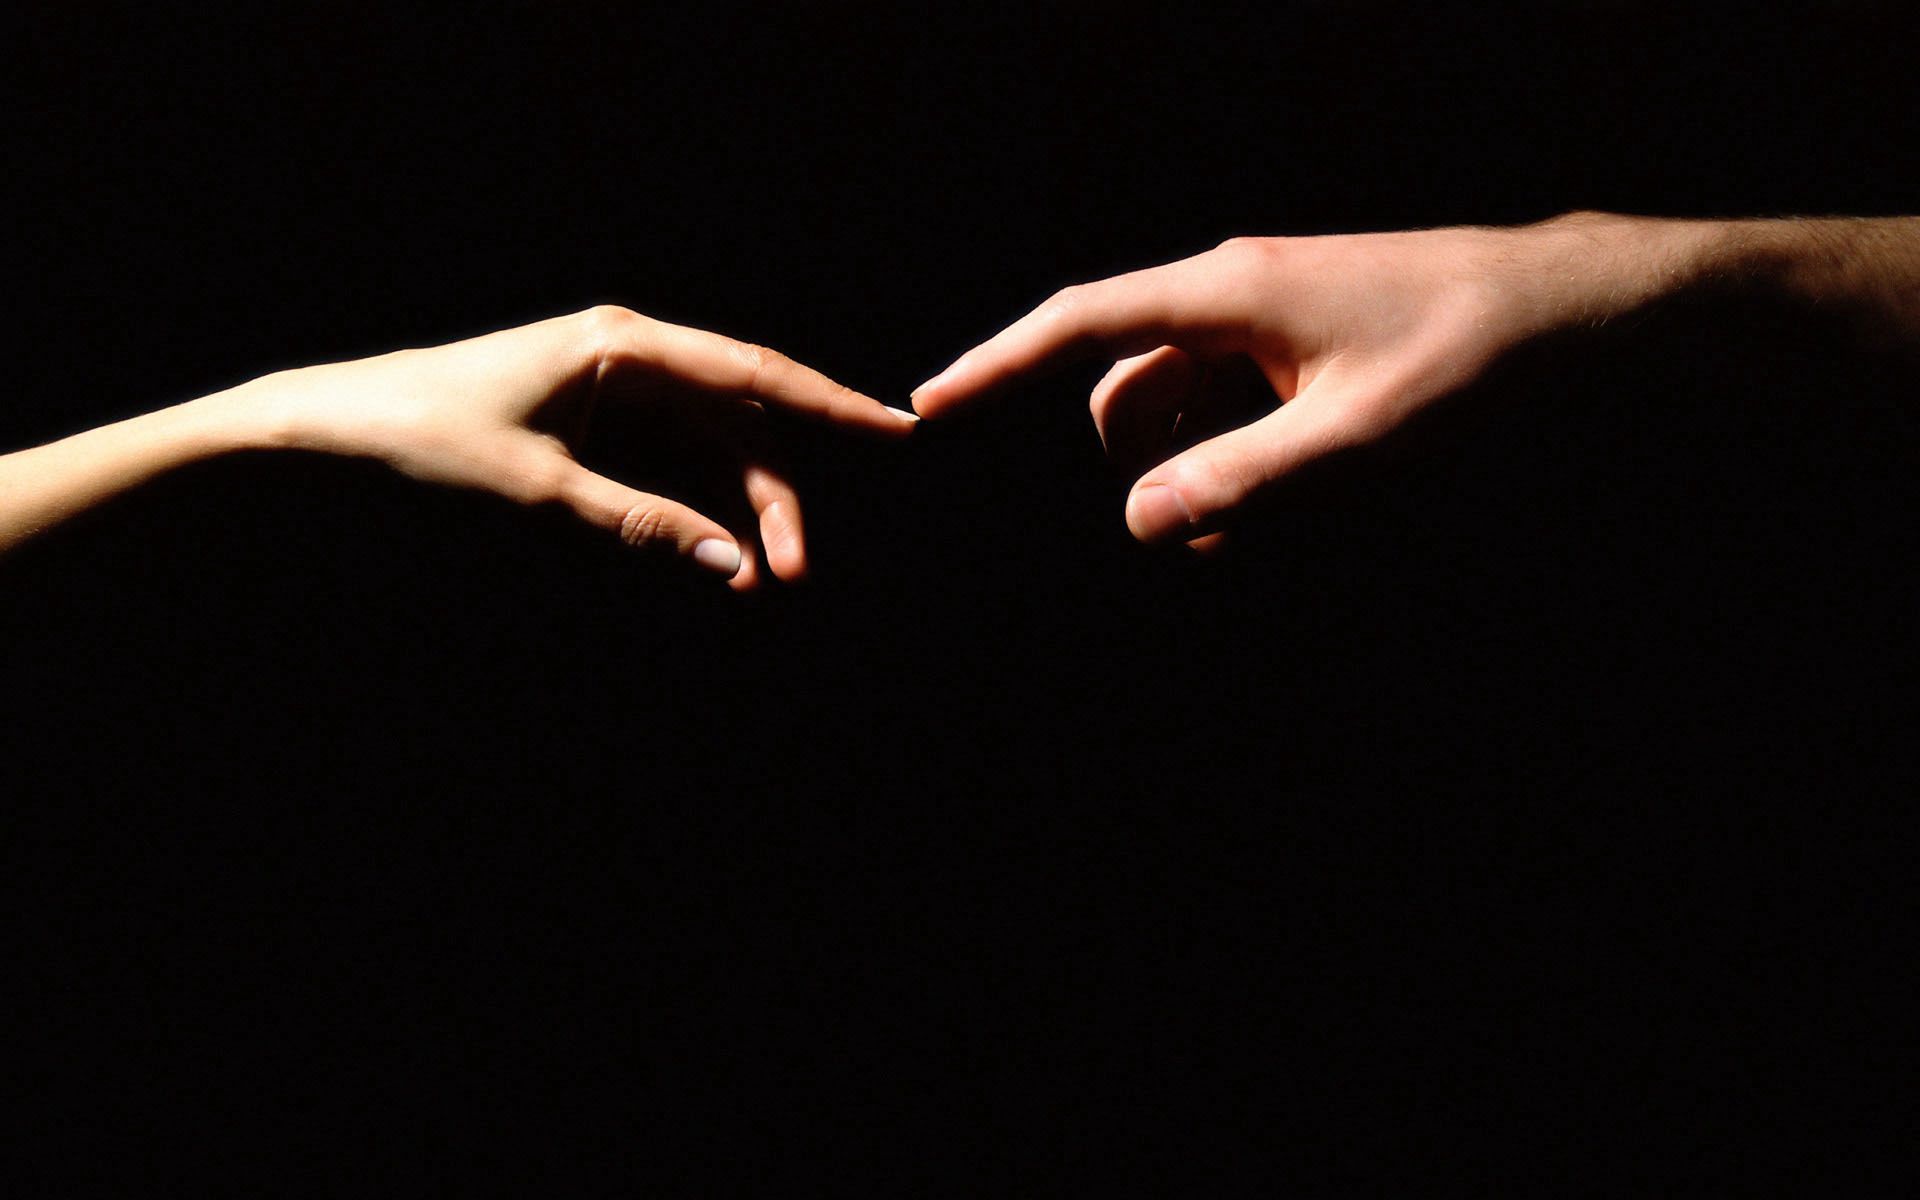 touch, love, black, hands, fingers